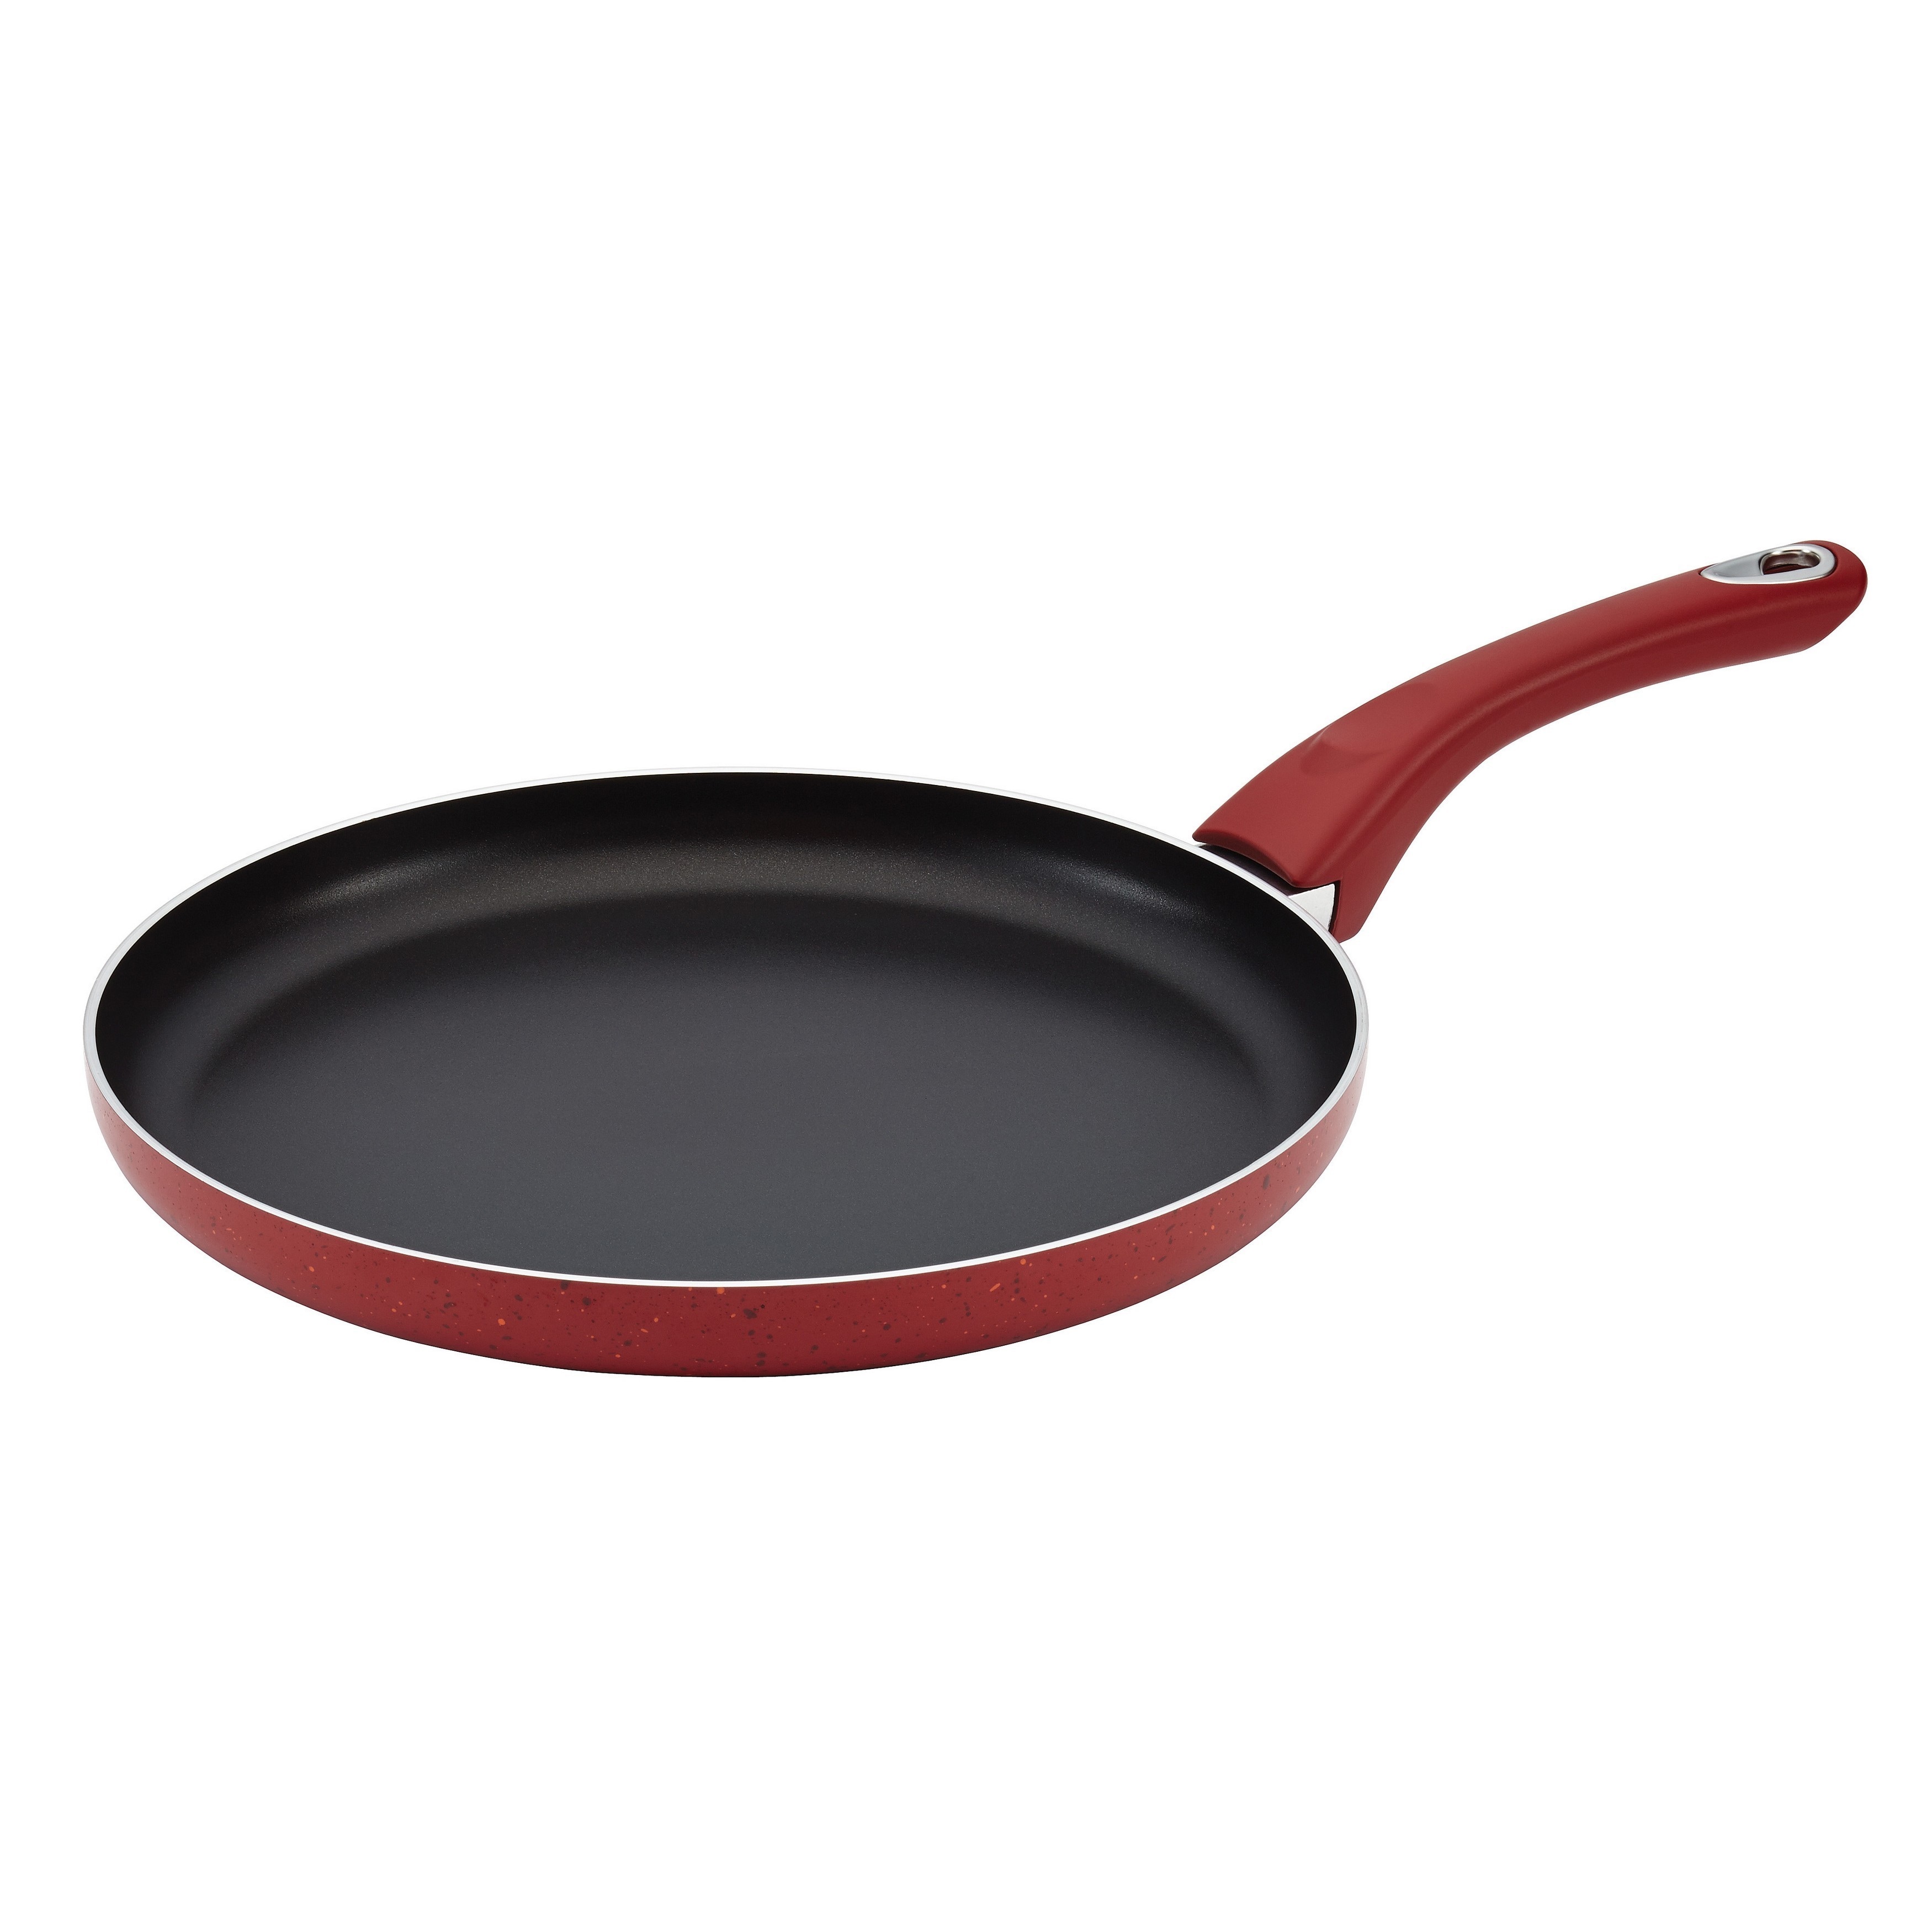 https://ak1.ostkcdn.com/images/products/8988509/Farberware-New-Traditions-Red-Speckled-Aluminum-Non-stick-10.5-inch-Round-Griddle-0a879445-2a9b-49e6-91fc-f1d2a492e679.jpg